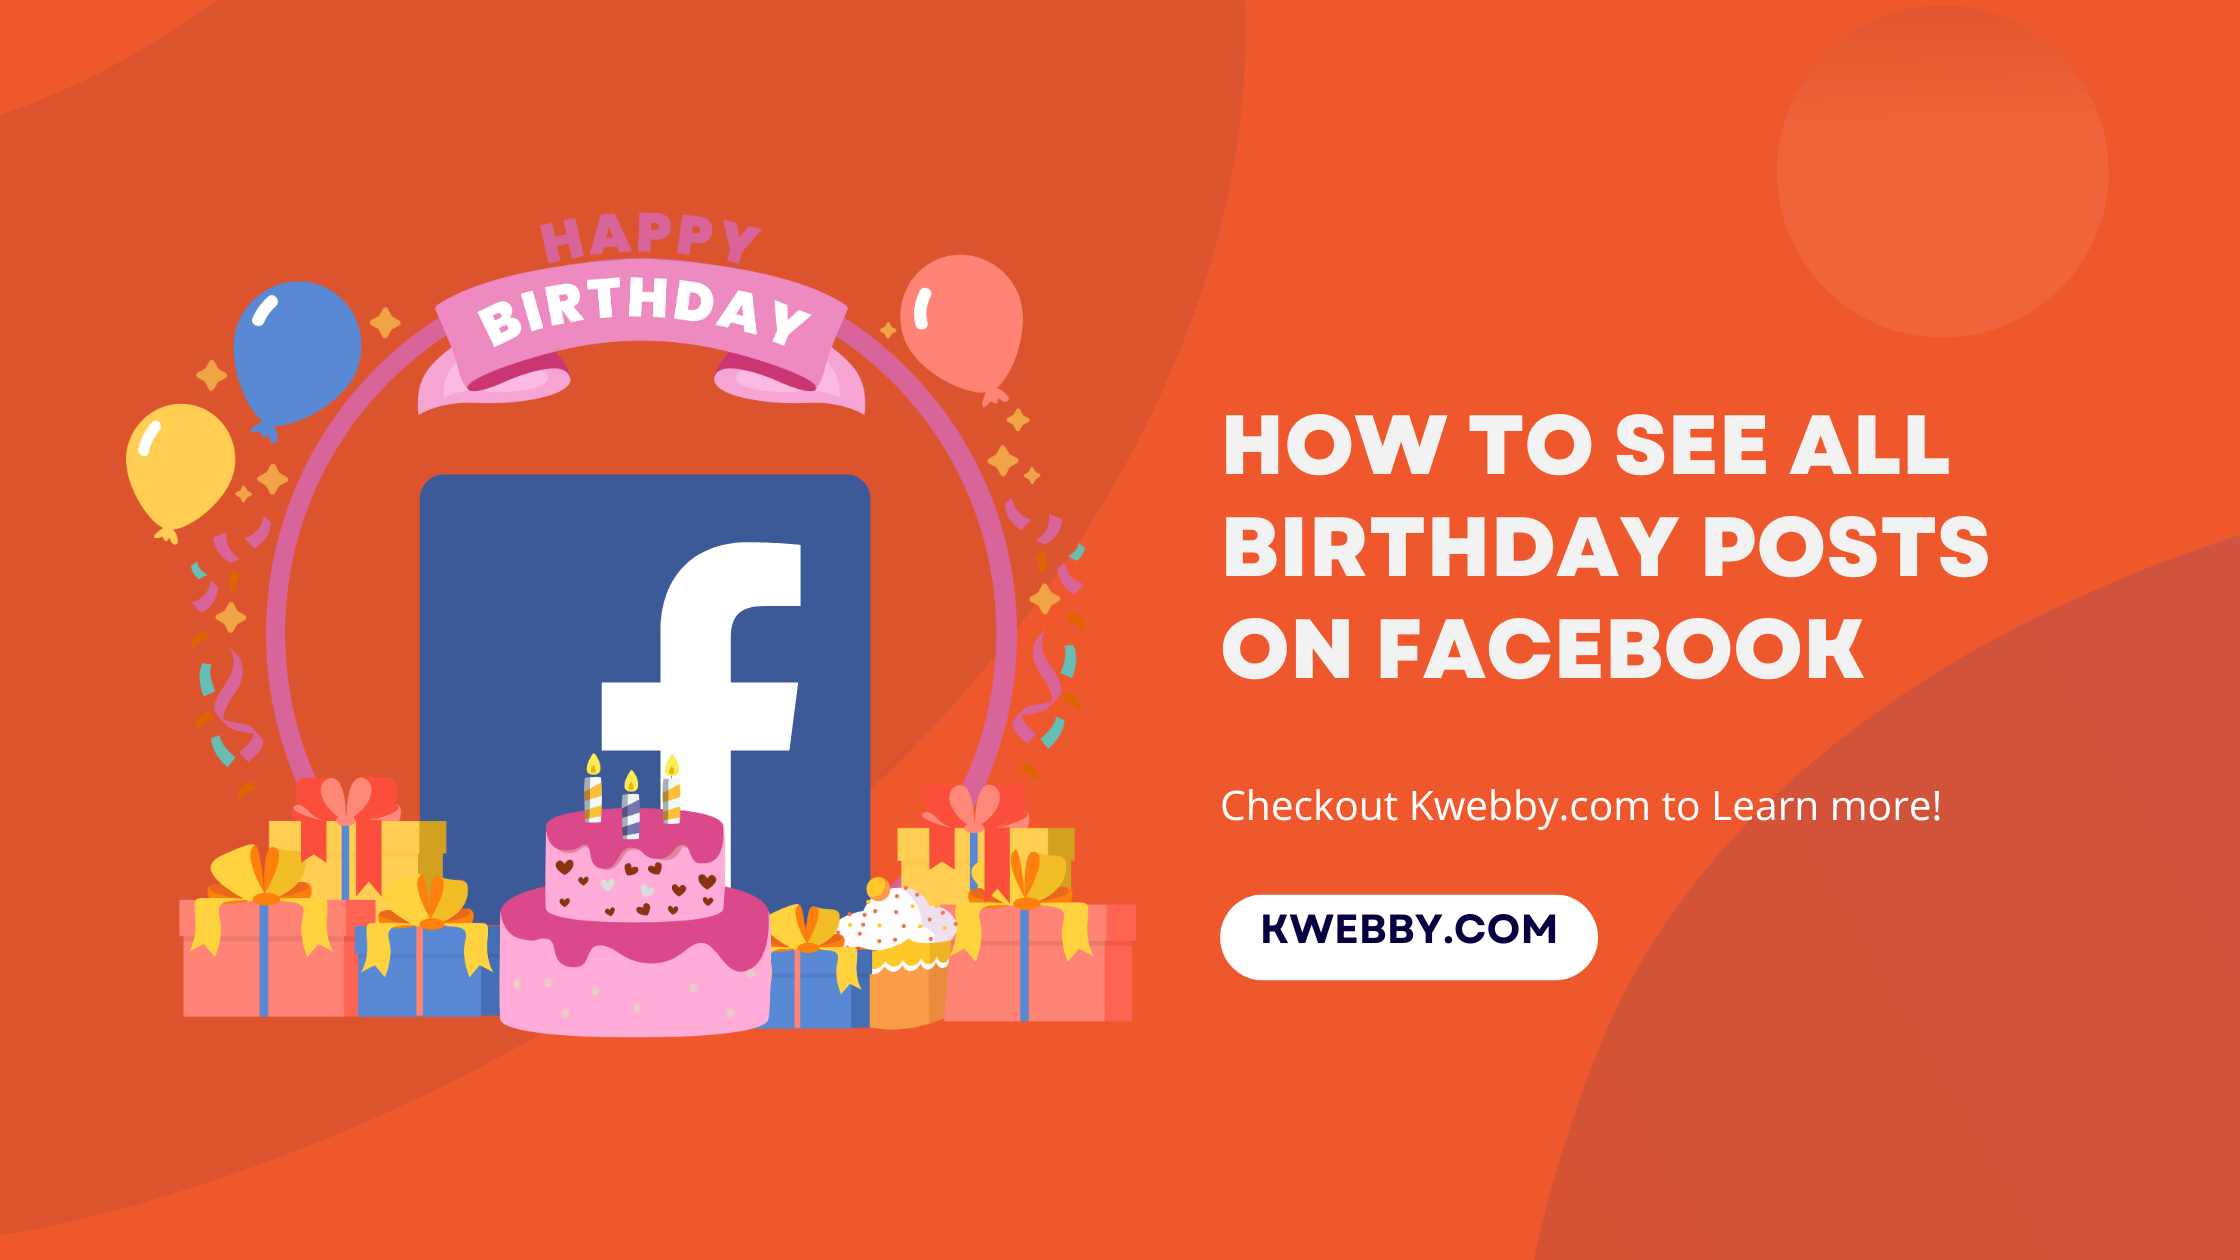 How to see all birthday posts on Facebook